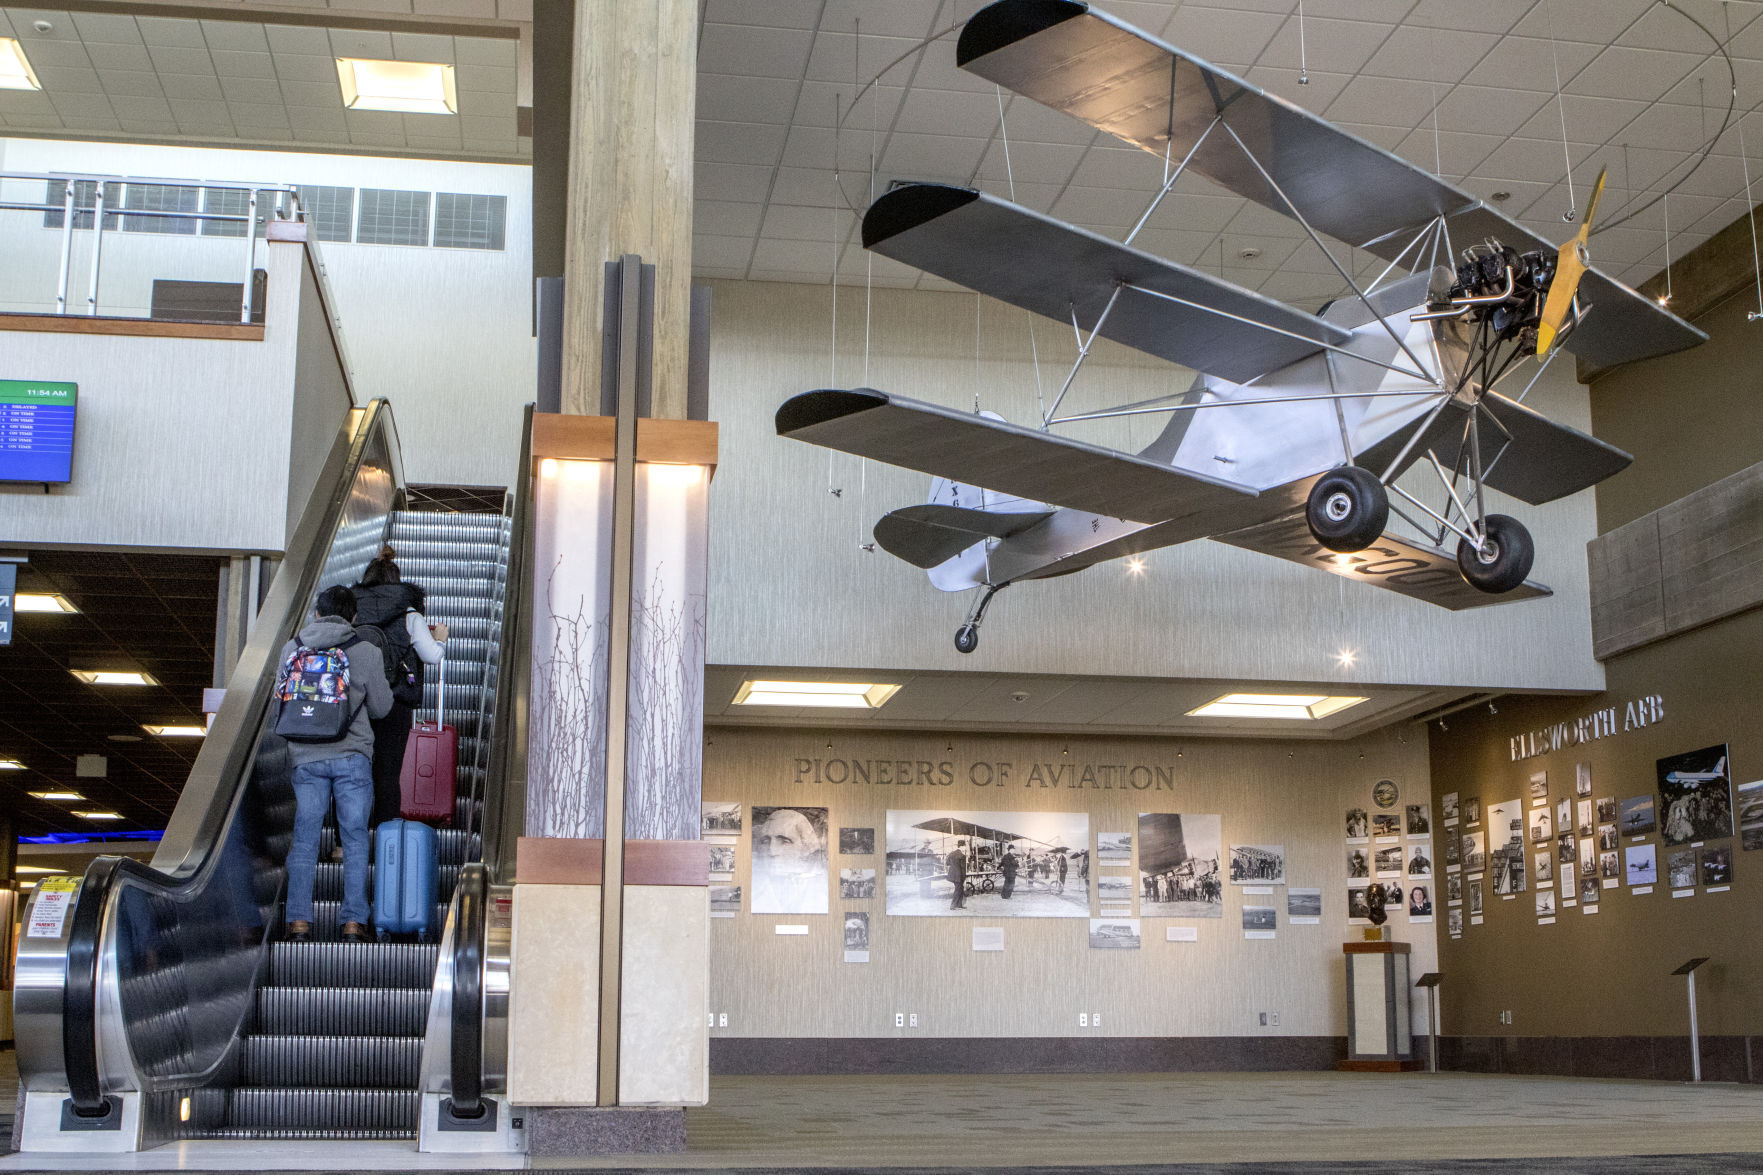 rapid city airport miles from sioux city iowa